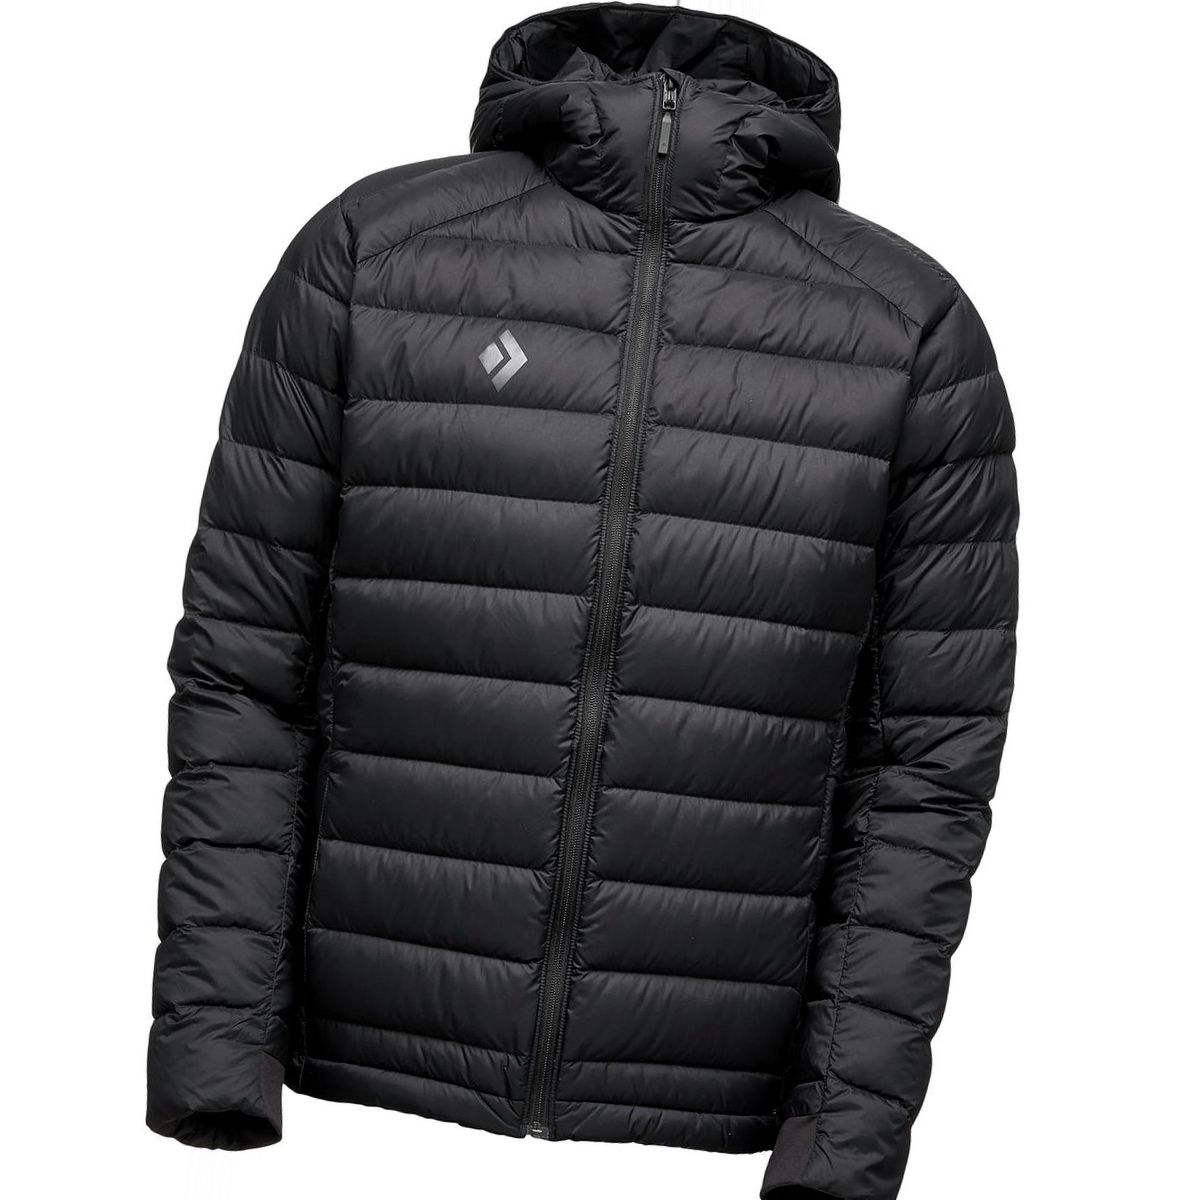 Black Diamond Cold Forge Hooded Down Jacket - Men's